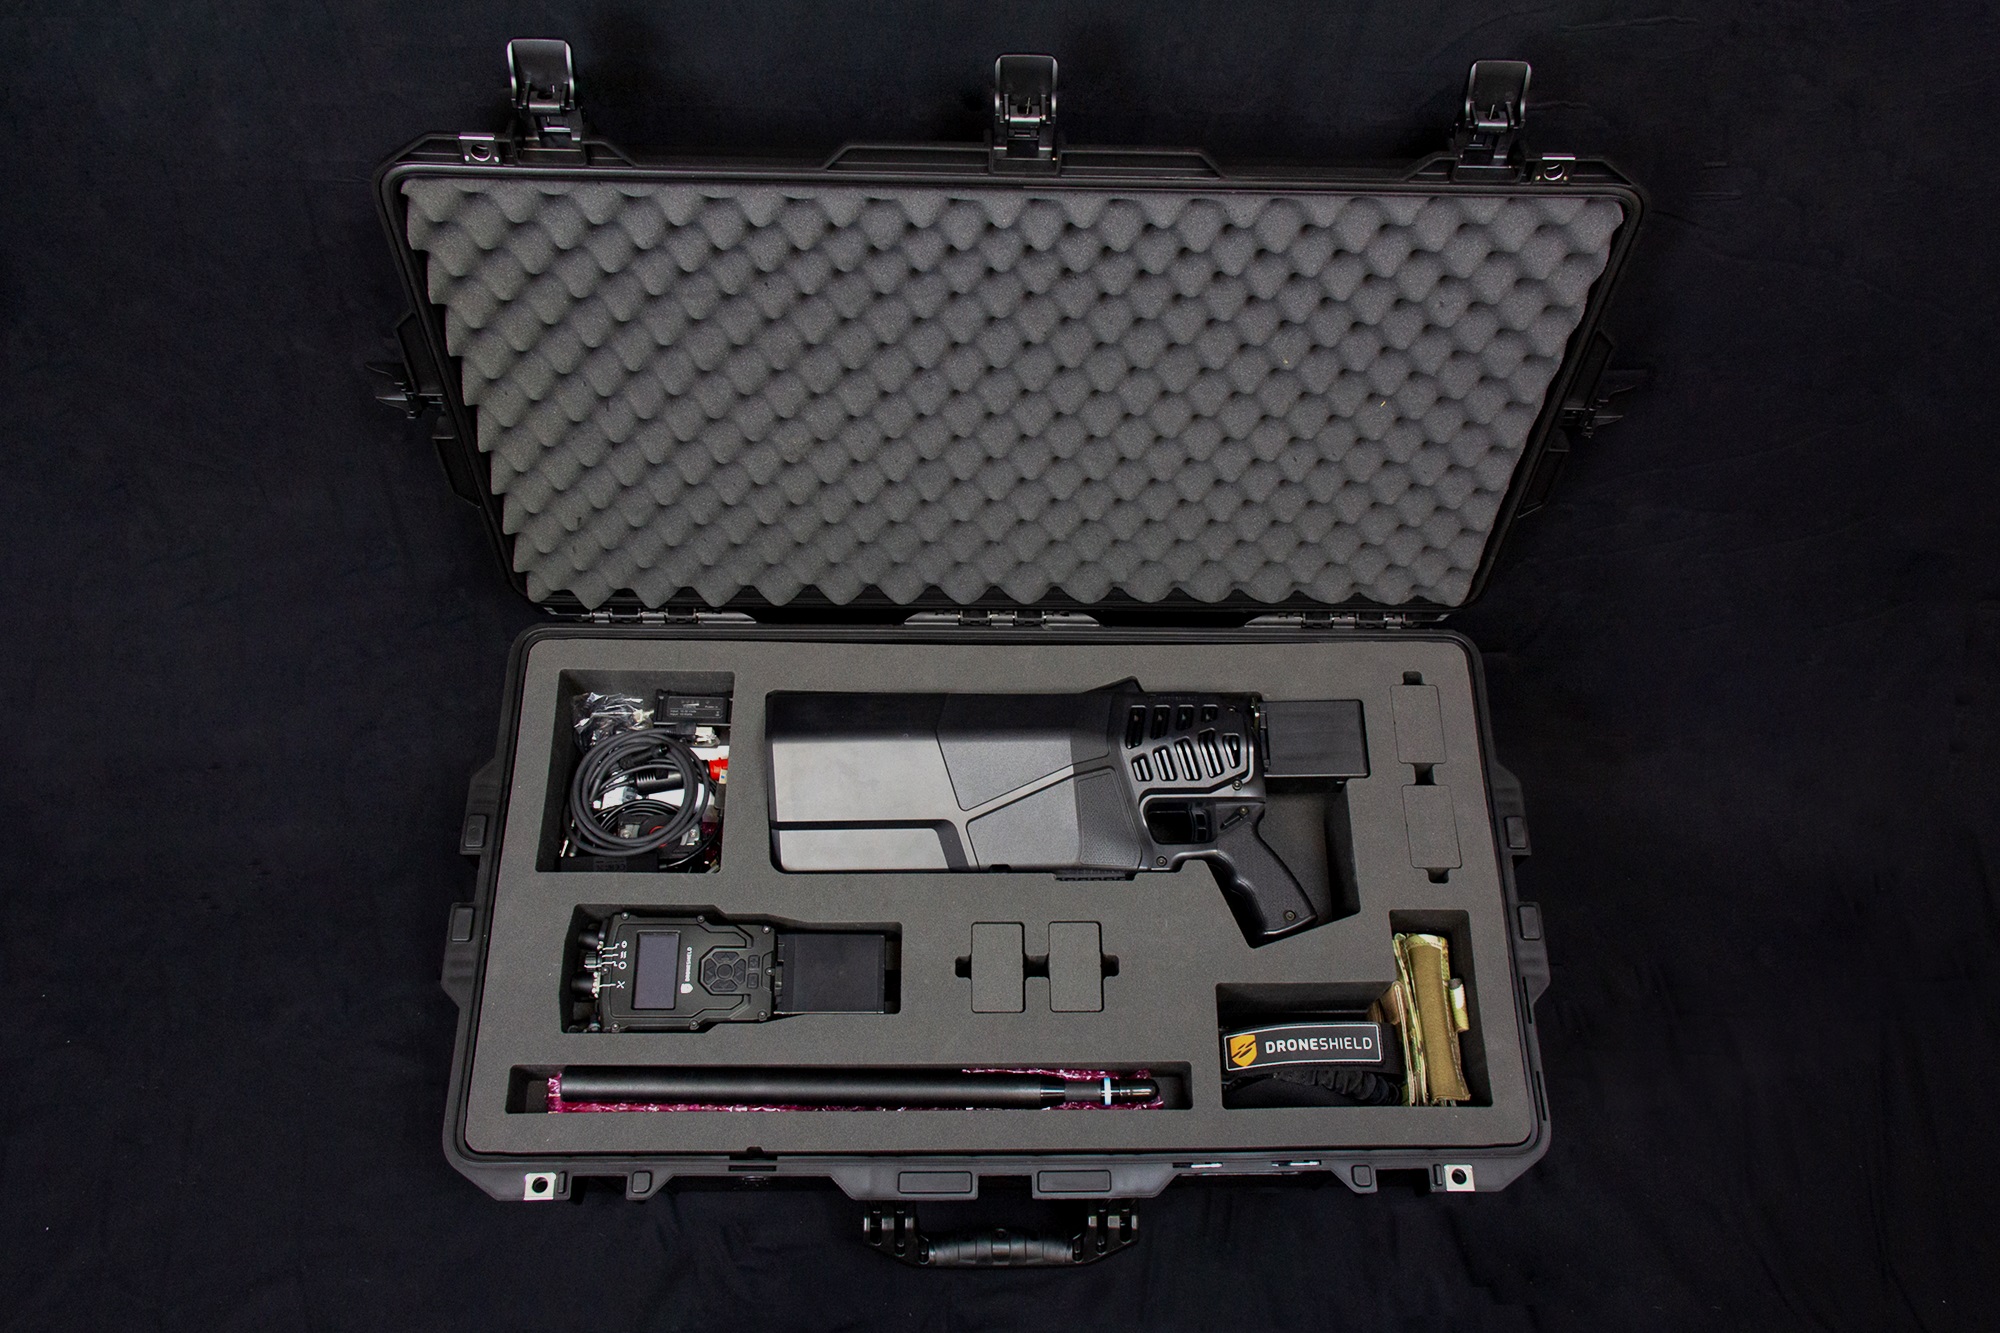 Immediate Response Kit (IRK) Portable Detect and Defeat